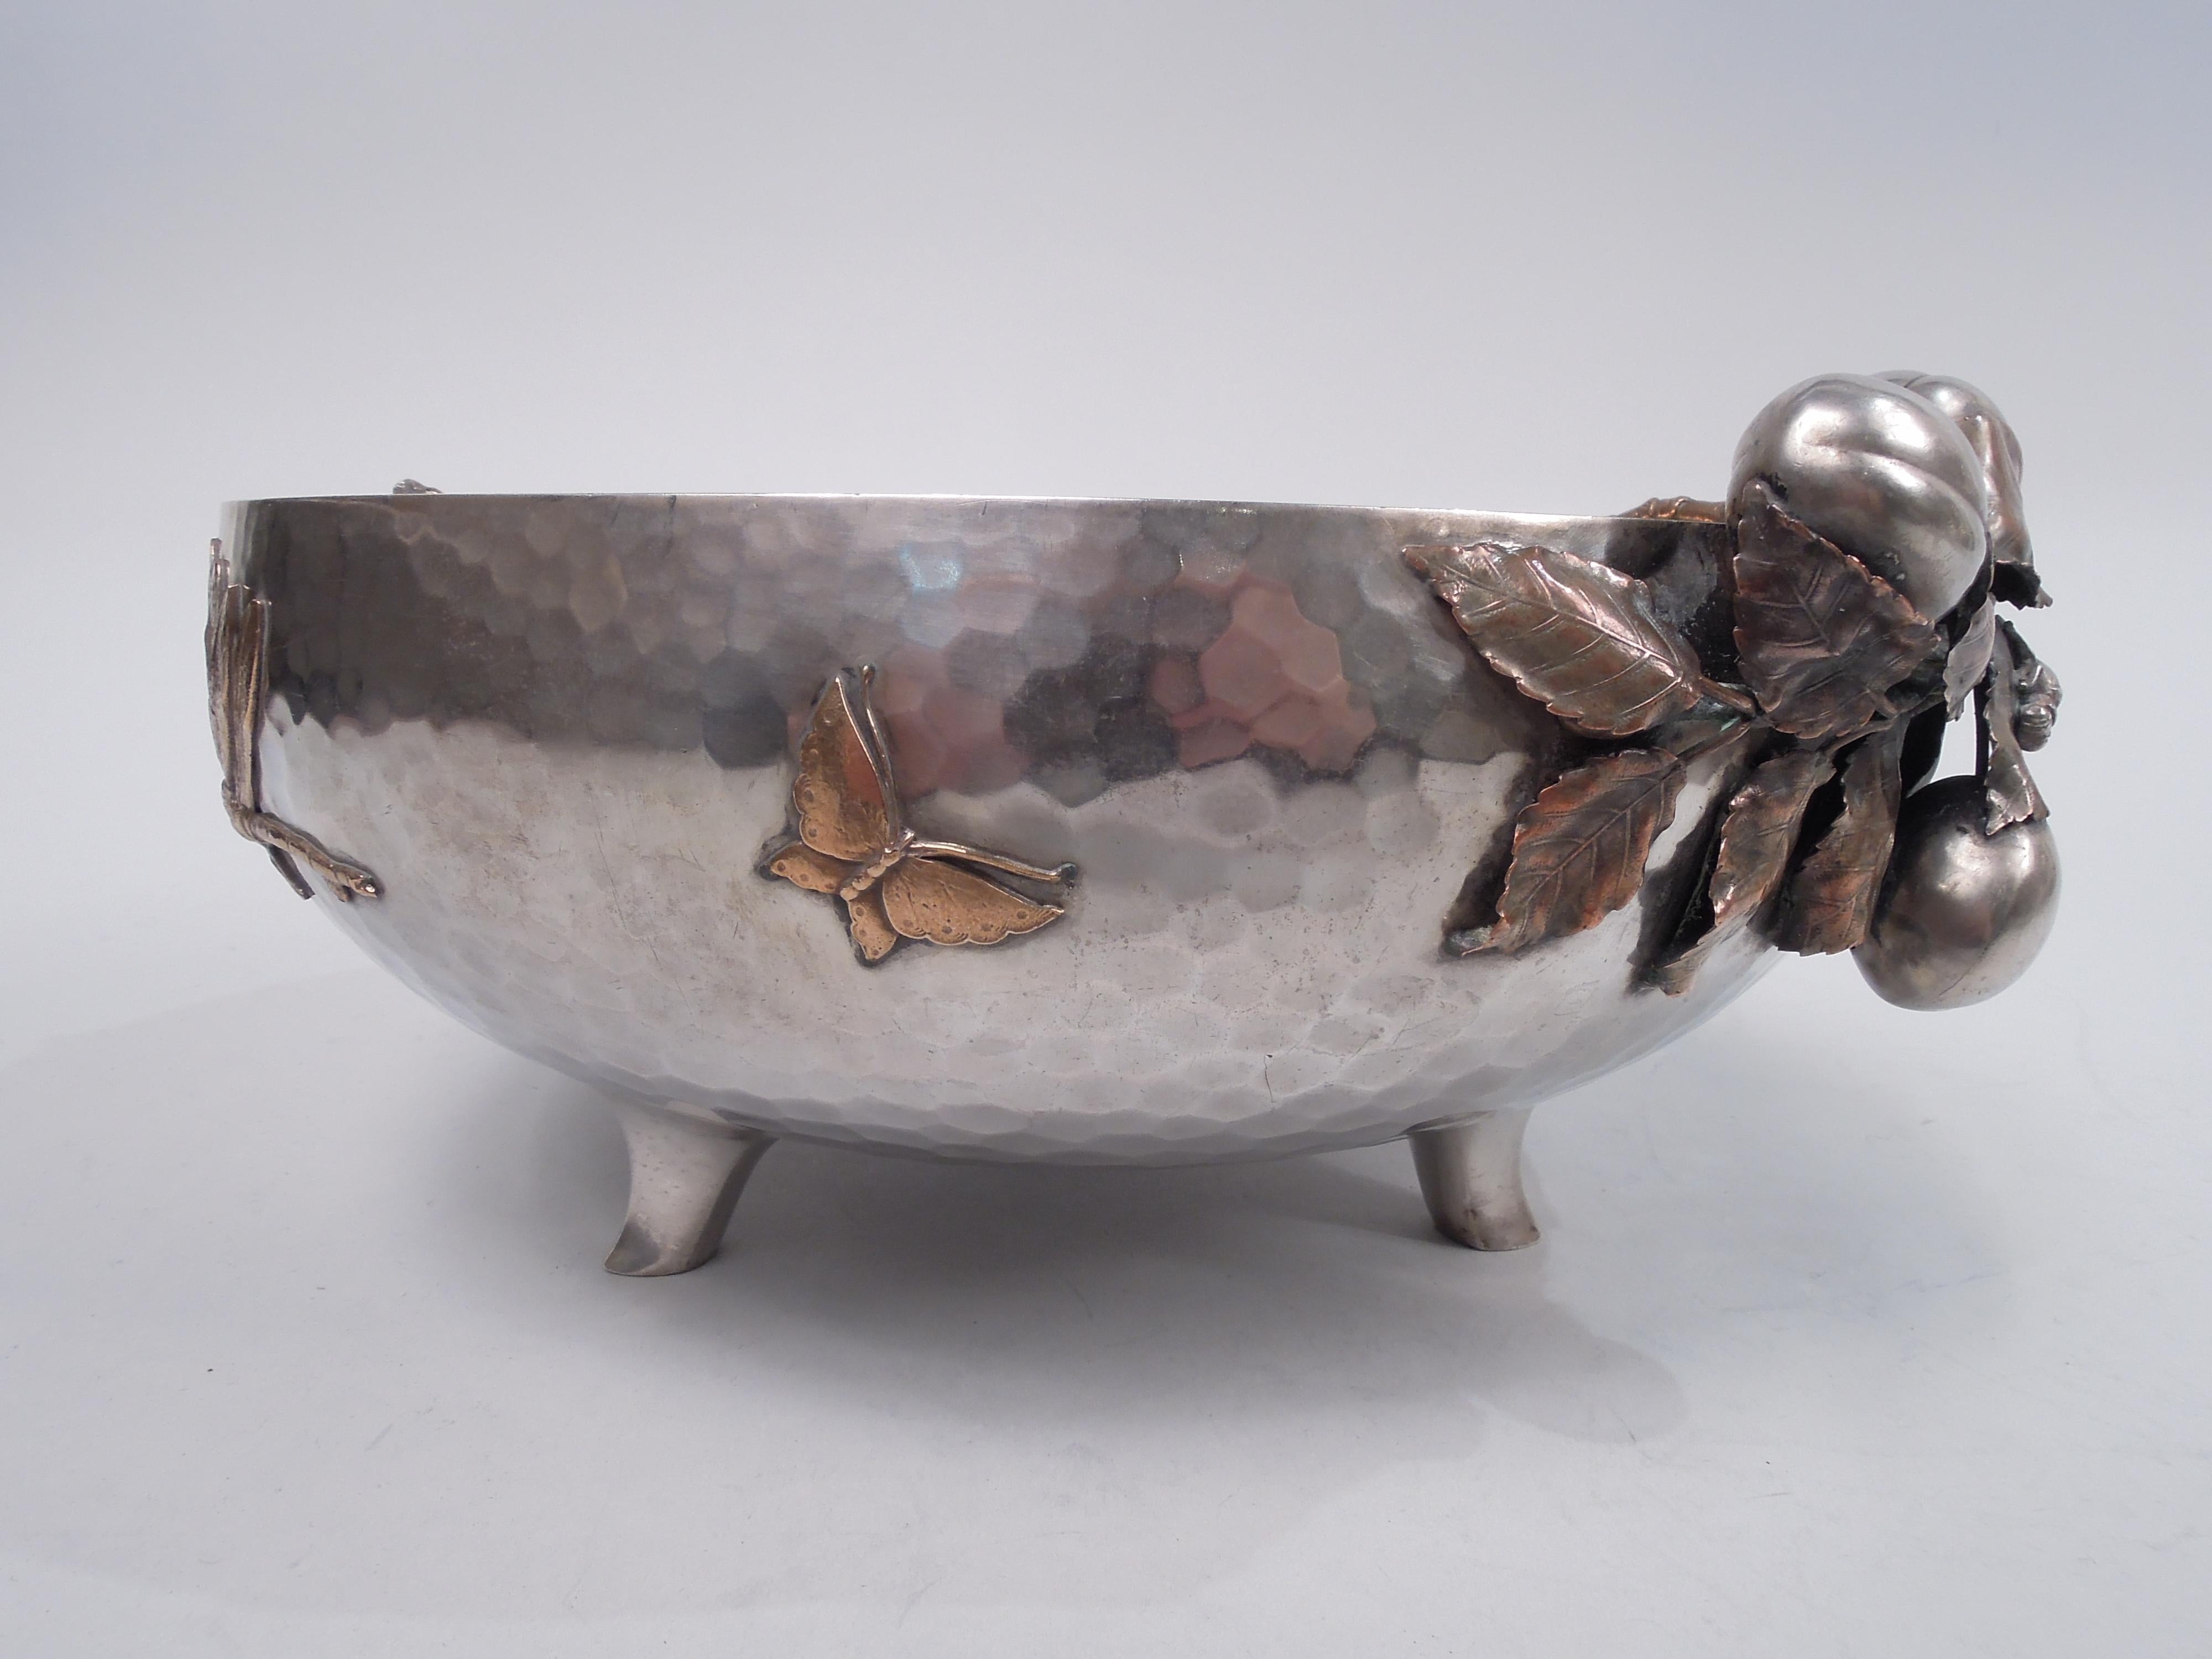 Japonesque mixed metal sterling silver bowl. Made by Gorham in Providence in 1883. Curved sides with allover spot hammering and gilt-washed interior. Applied copper and silver ornament: Rim overhung with fruiting and leafing branch mounted to